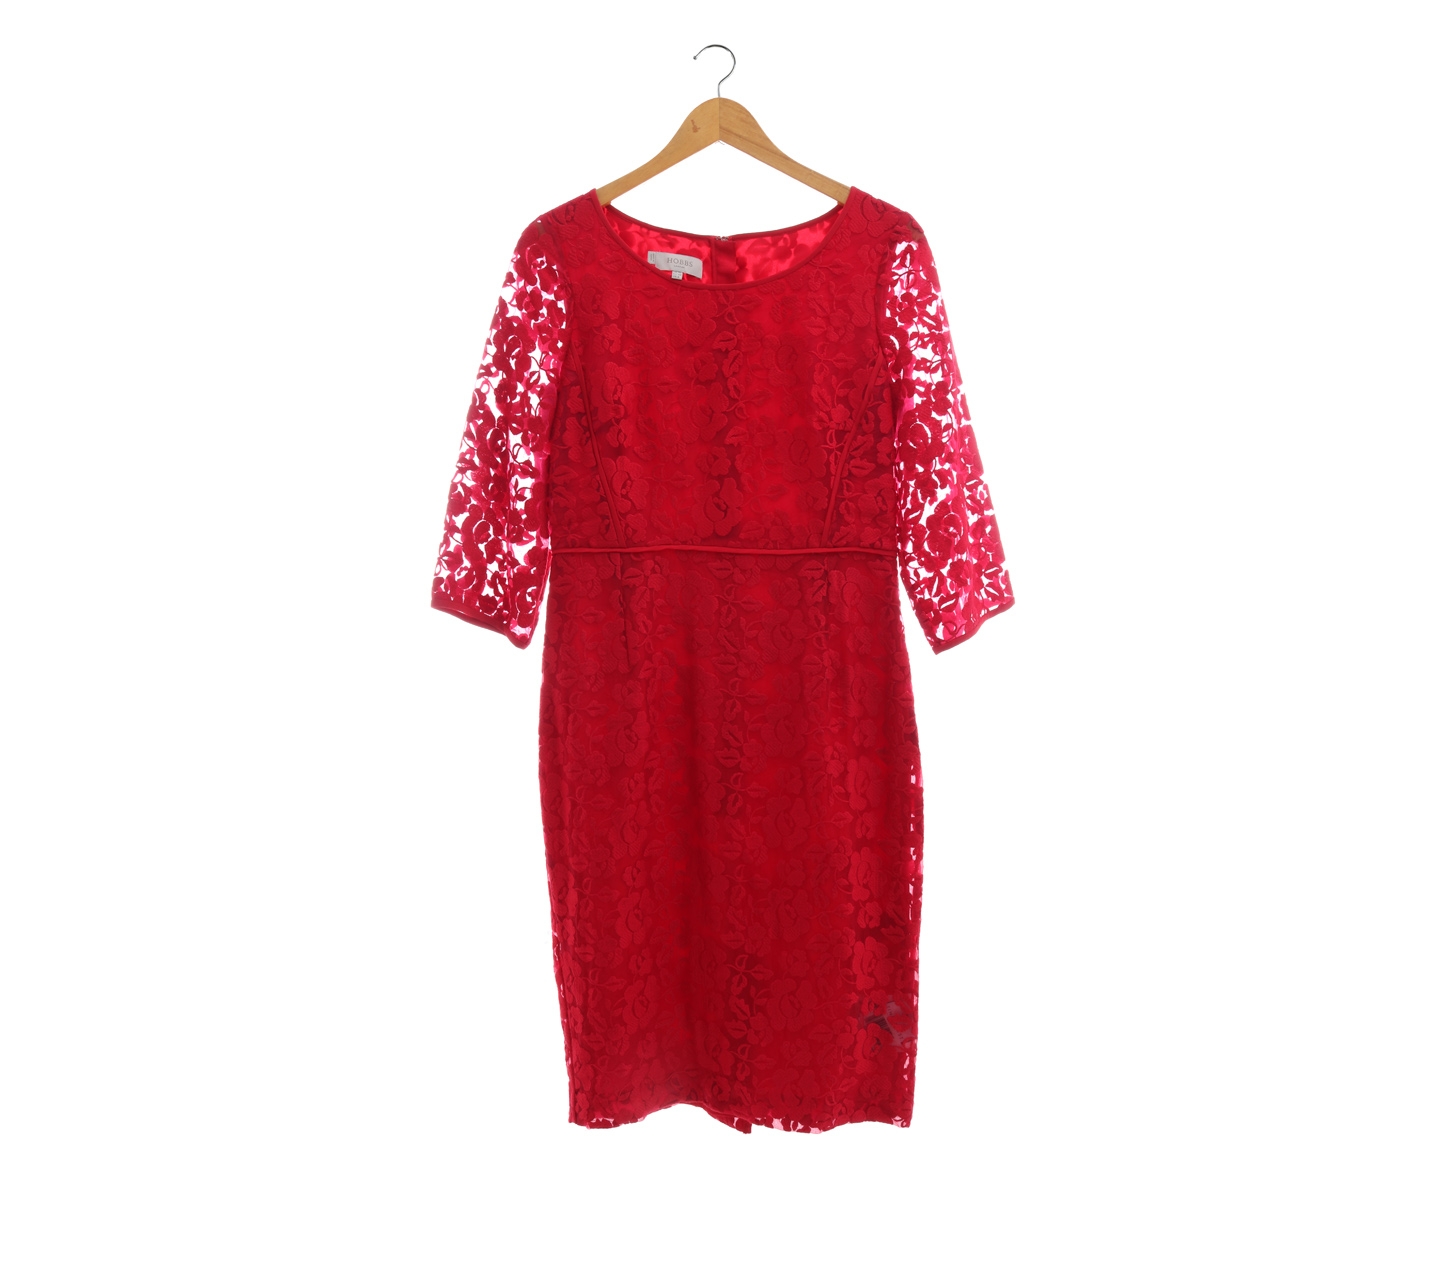 Hobbs Red Patterned Lace Mini Dress